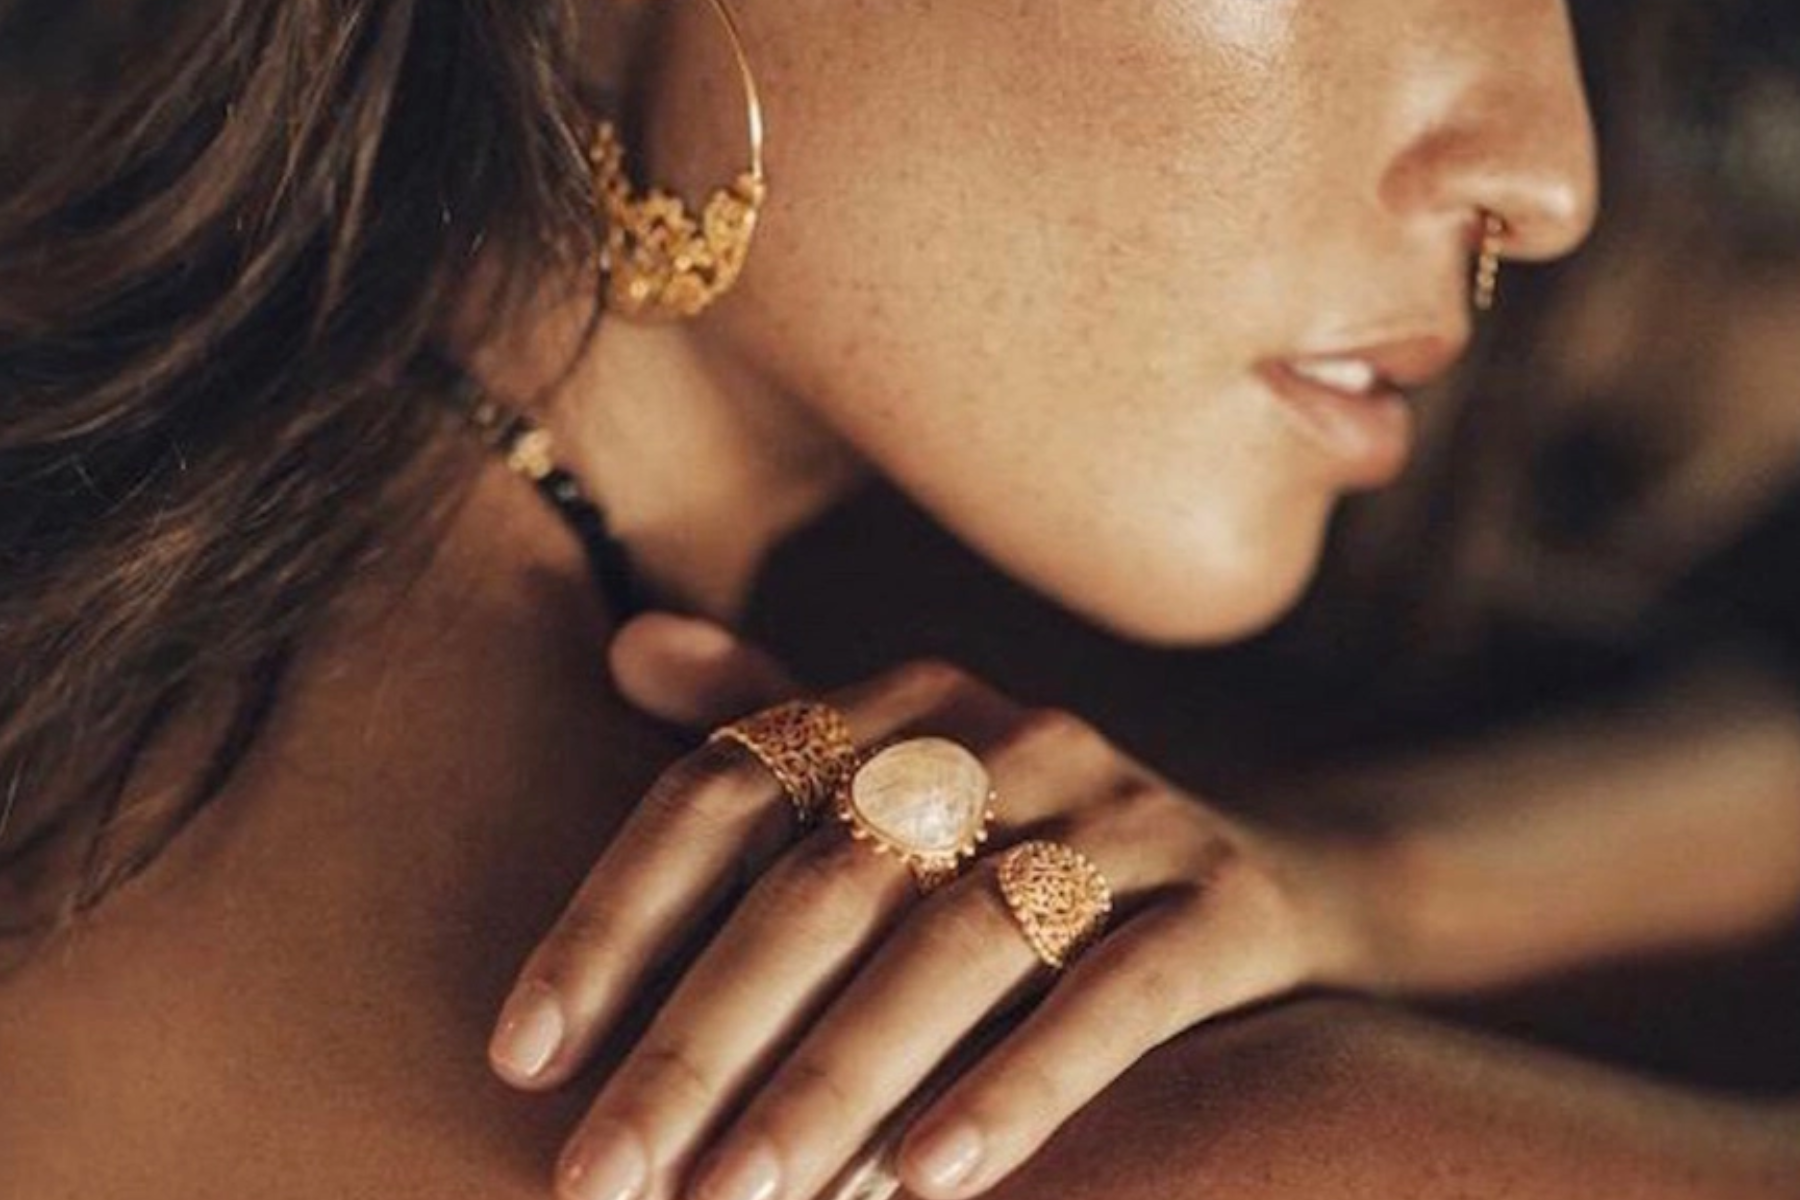 A modern woman poses with gold jewelry